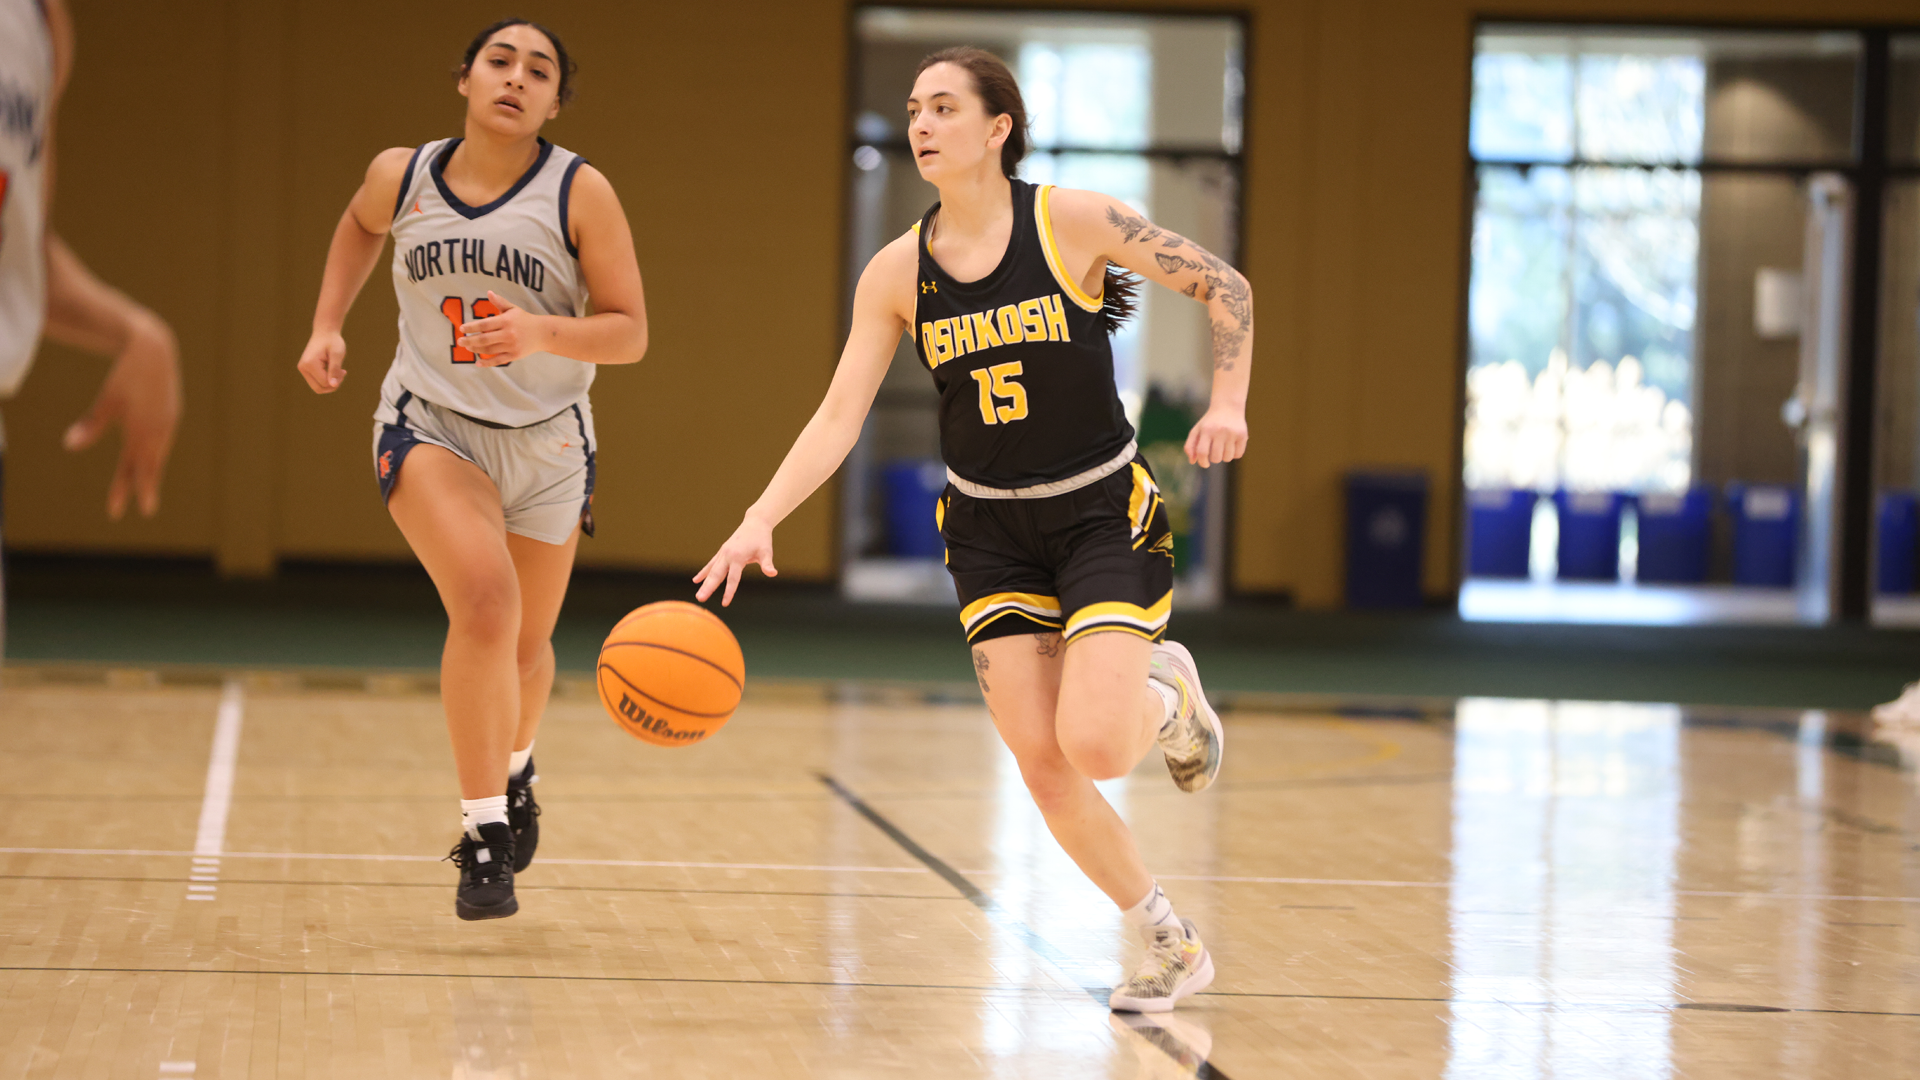 Kennedy Osterman scored 15 points with career highs in free throws (eight) and assists (eight) as the Titans beat Wittenberg on Wednesday